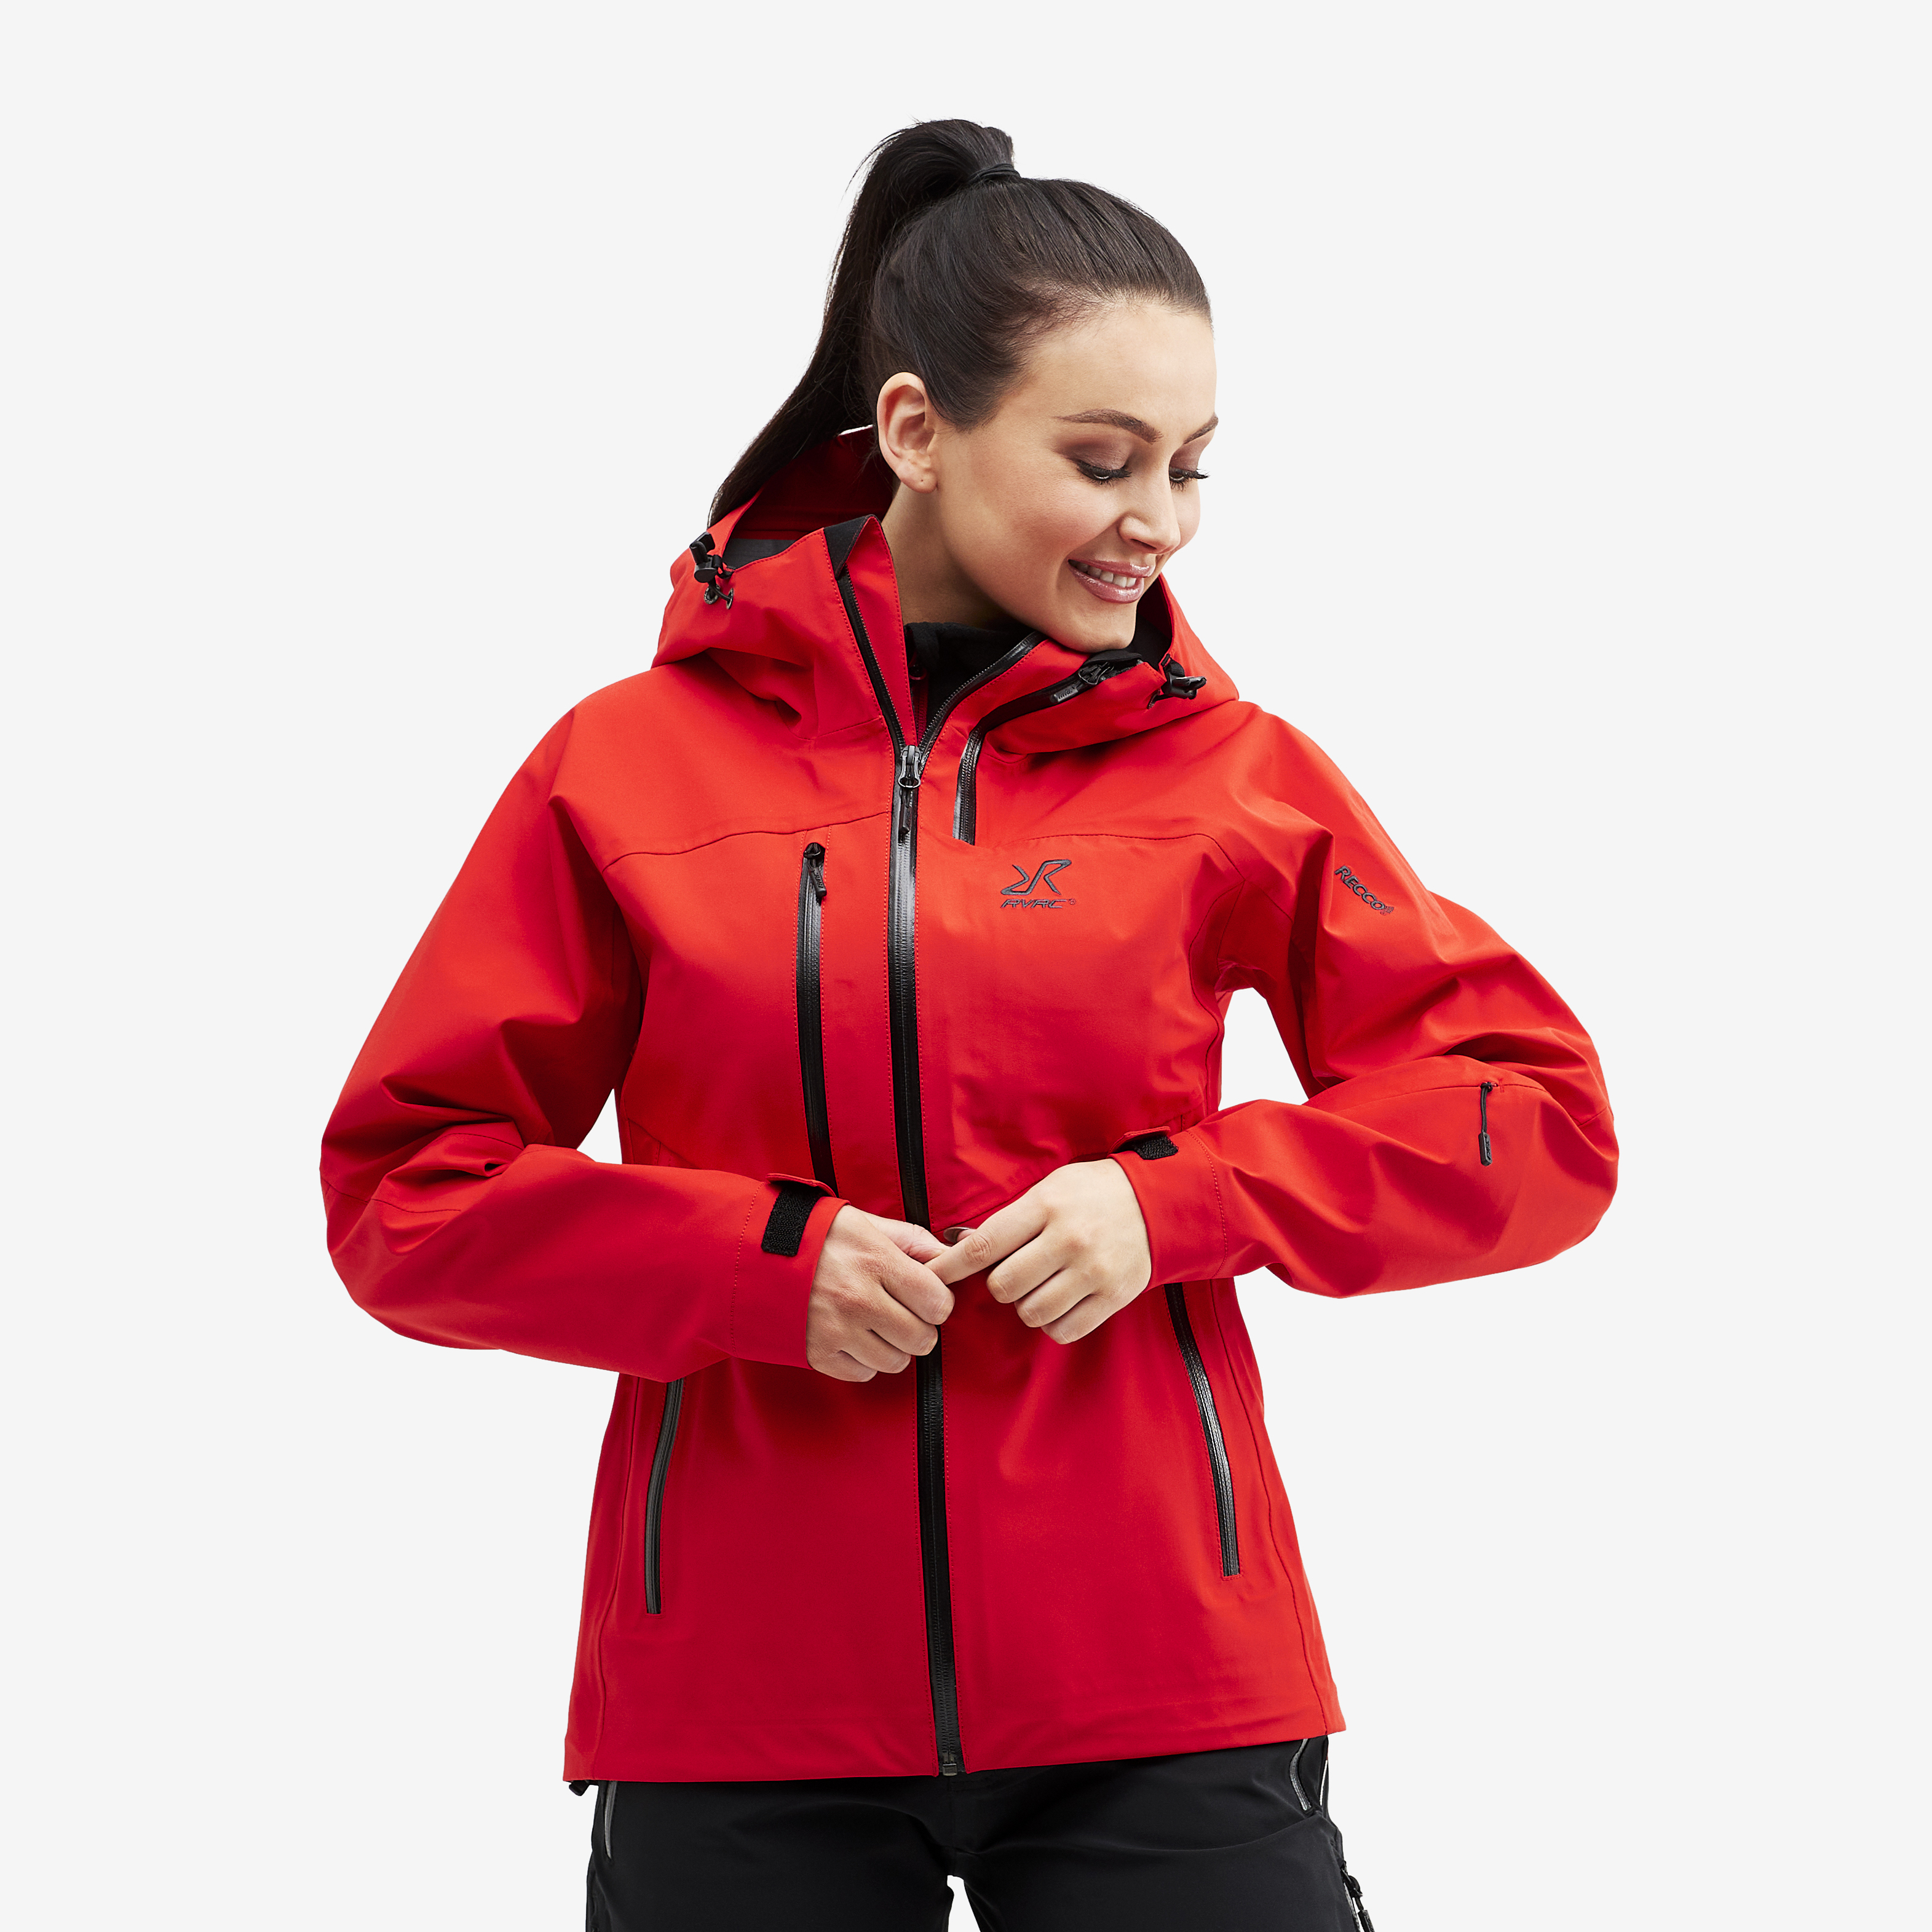 Cyclone Rescue Jacket 2.0 Flame Scarlet Naistele